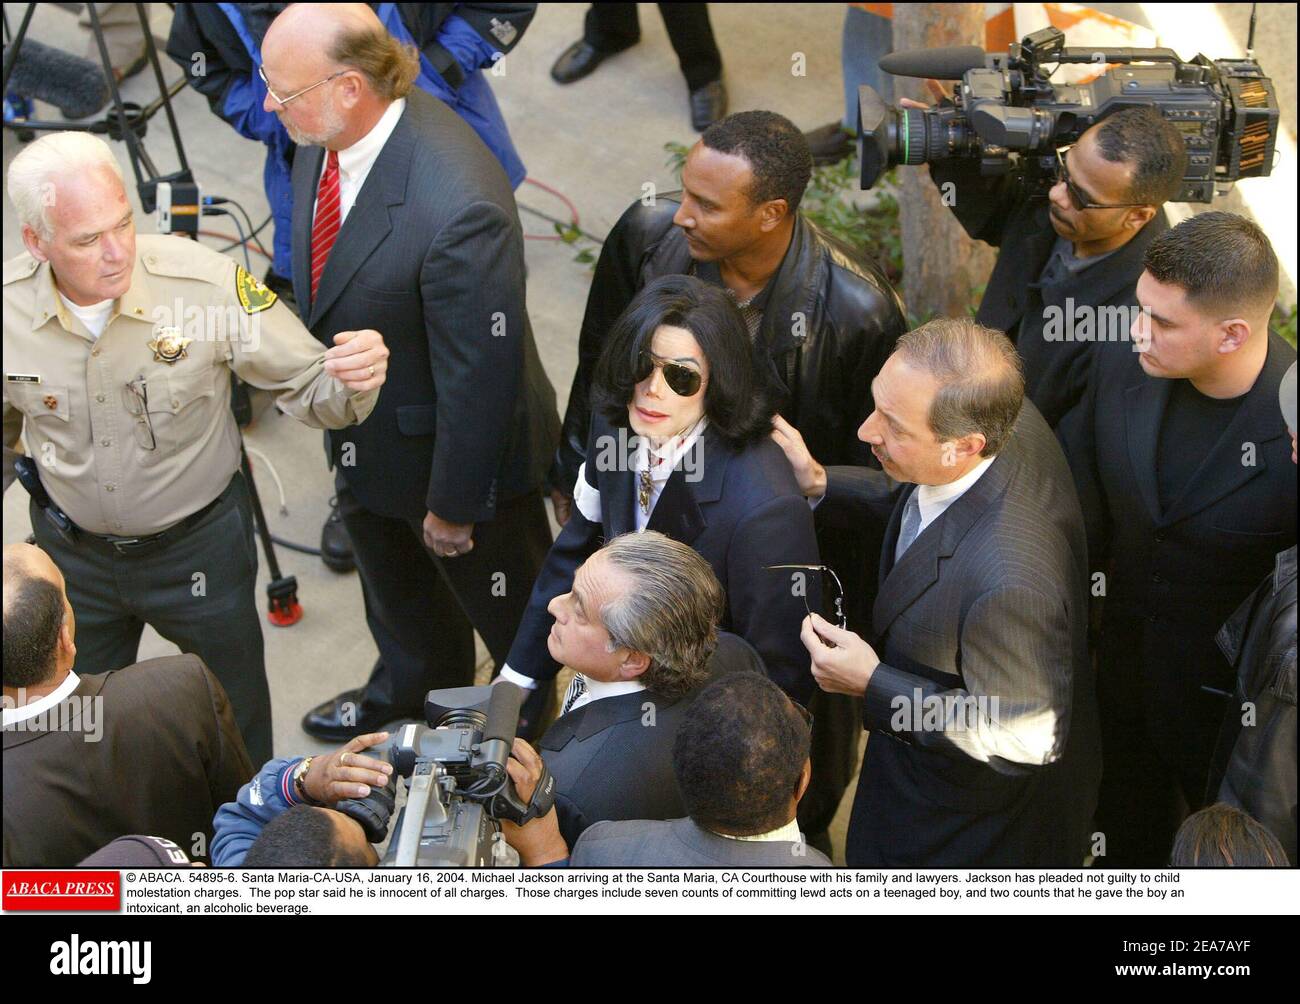 © ABACA. 54895-6. Santa Maria-CA-USA, January 16, 2004. Michael Jackson arriving at the Santa Maria, CA Courthouse with his family and lawyers. Jackson has pleaded not guilty to child molestation charges. The pop star said he is innocent of all charges. Those charges include seven counts of committing lewd acts on a teenaged boy, and two counts that he gave the boy an intoxicant, an alcoholic beverage. Stock Photo